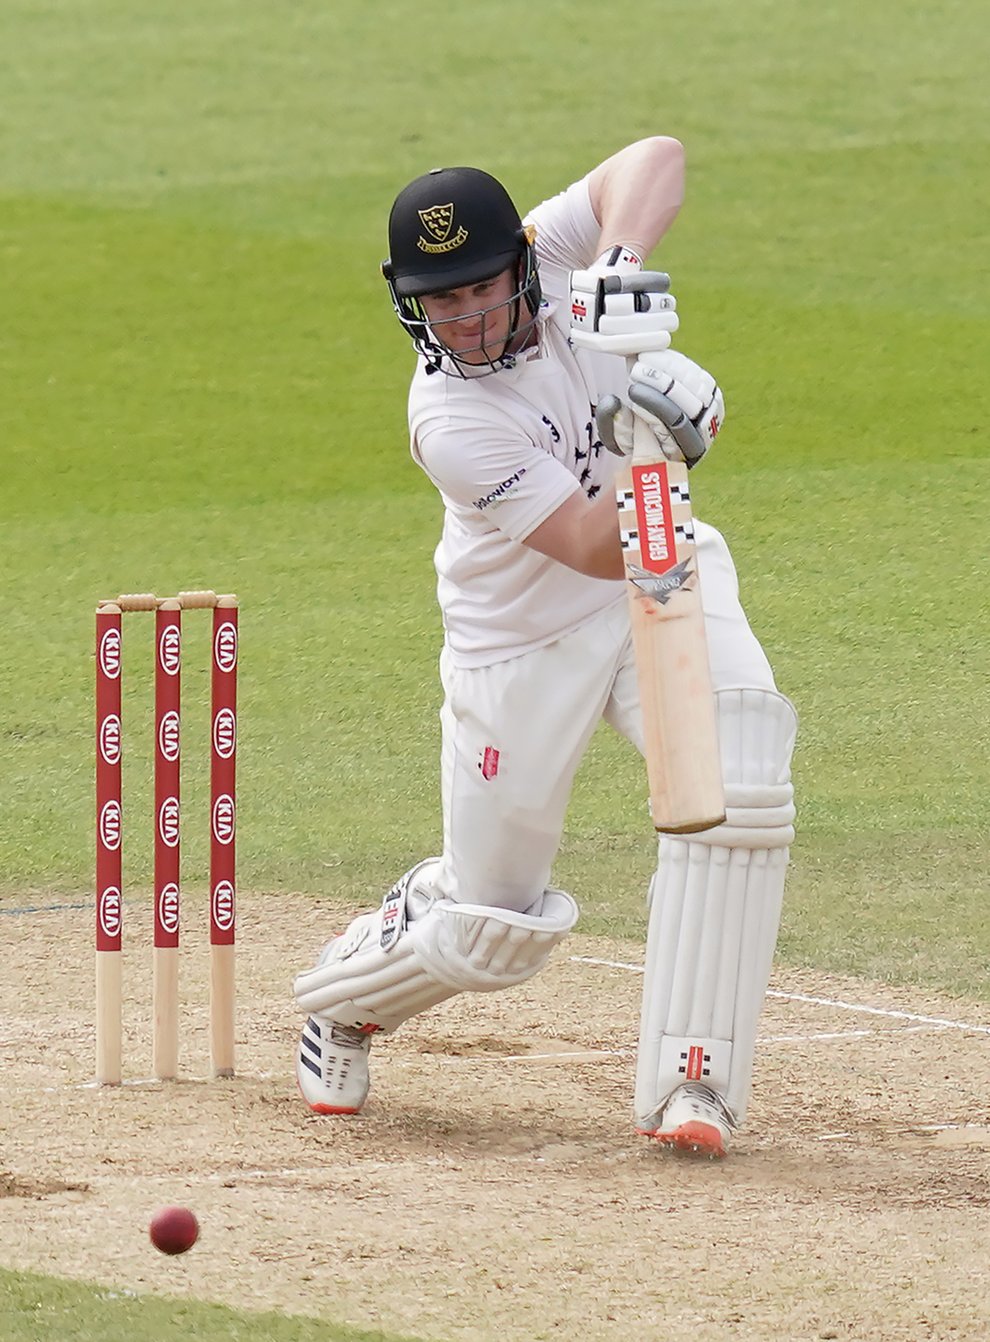 Ben Brown's 126 not out off 174 balls was a punchy captain's innings.